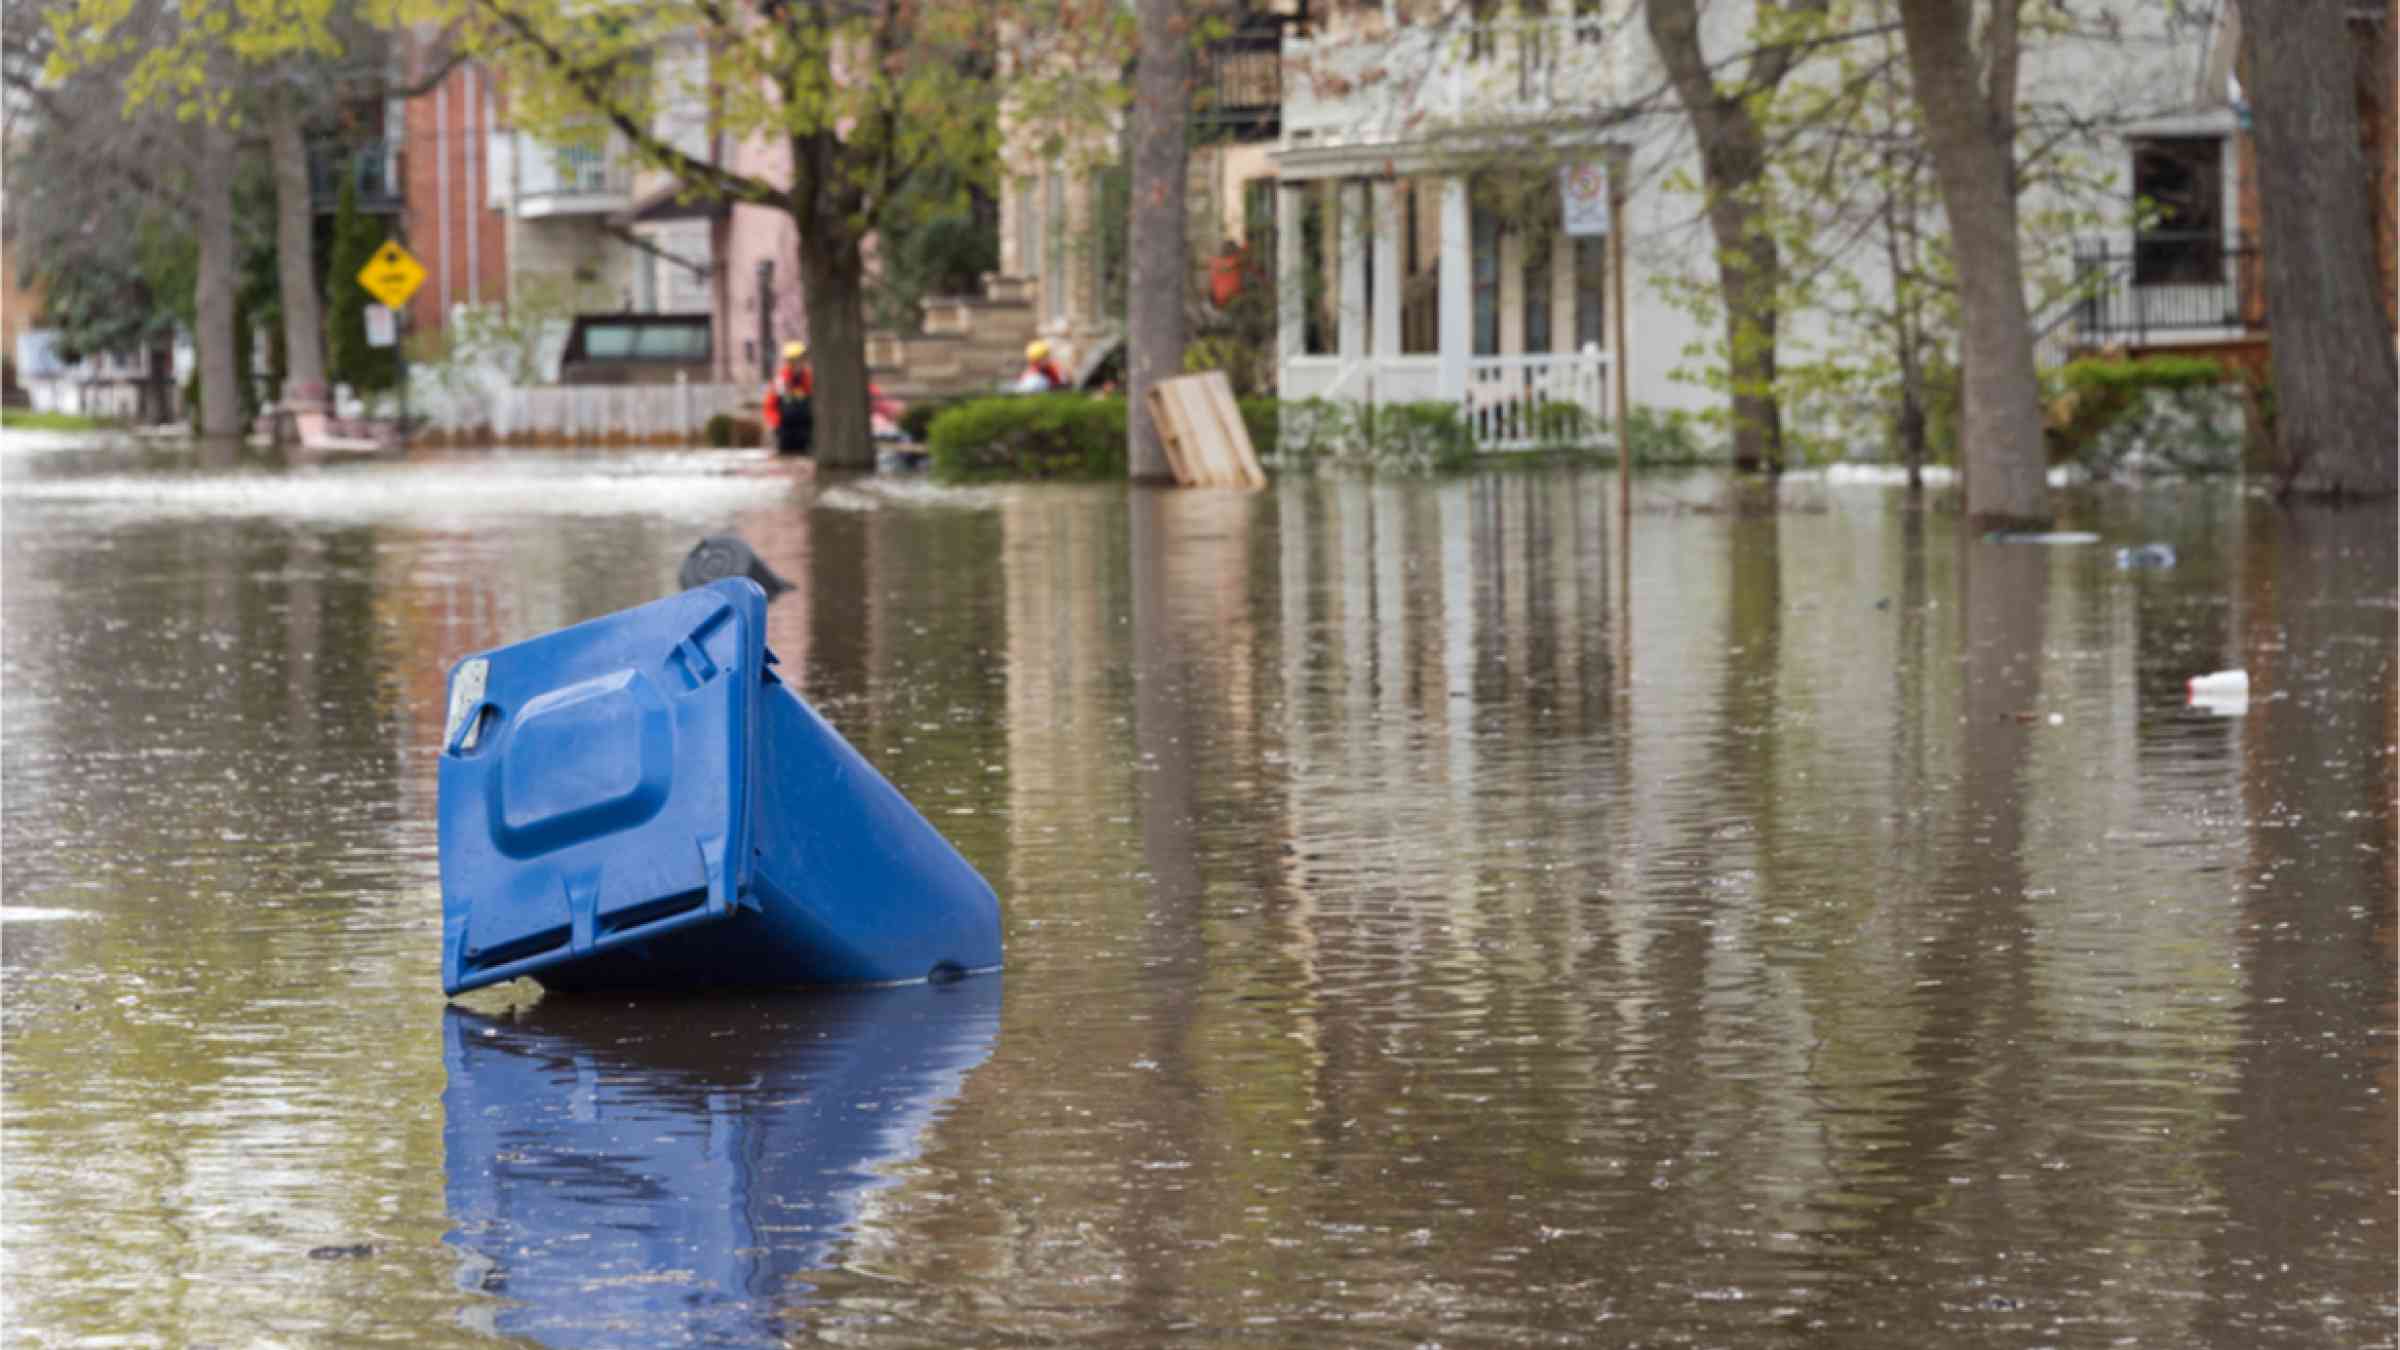 A blue bin floating on water during flooding in Montreal